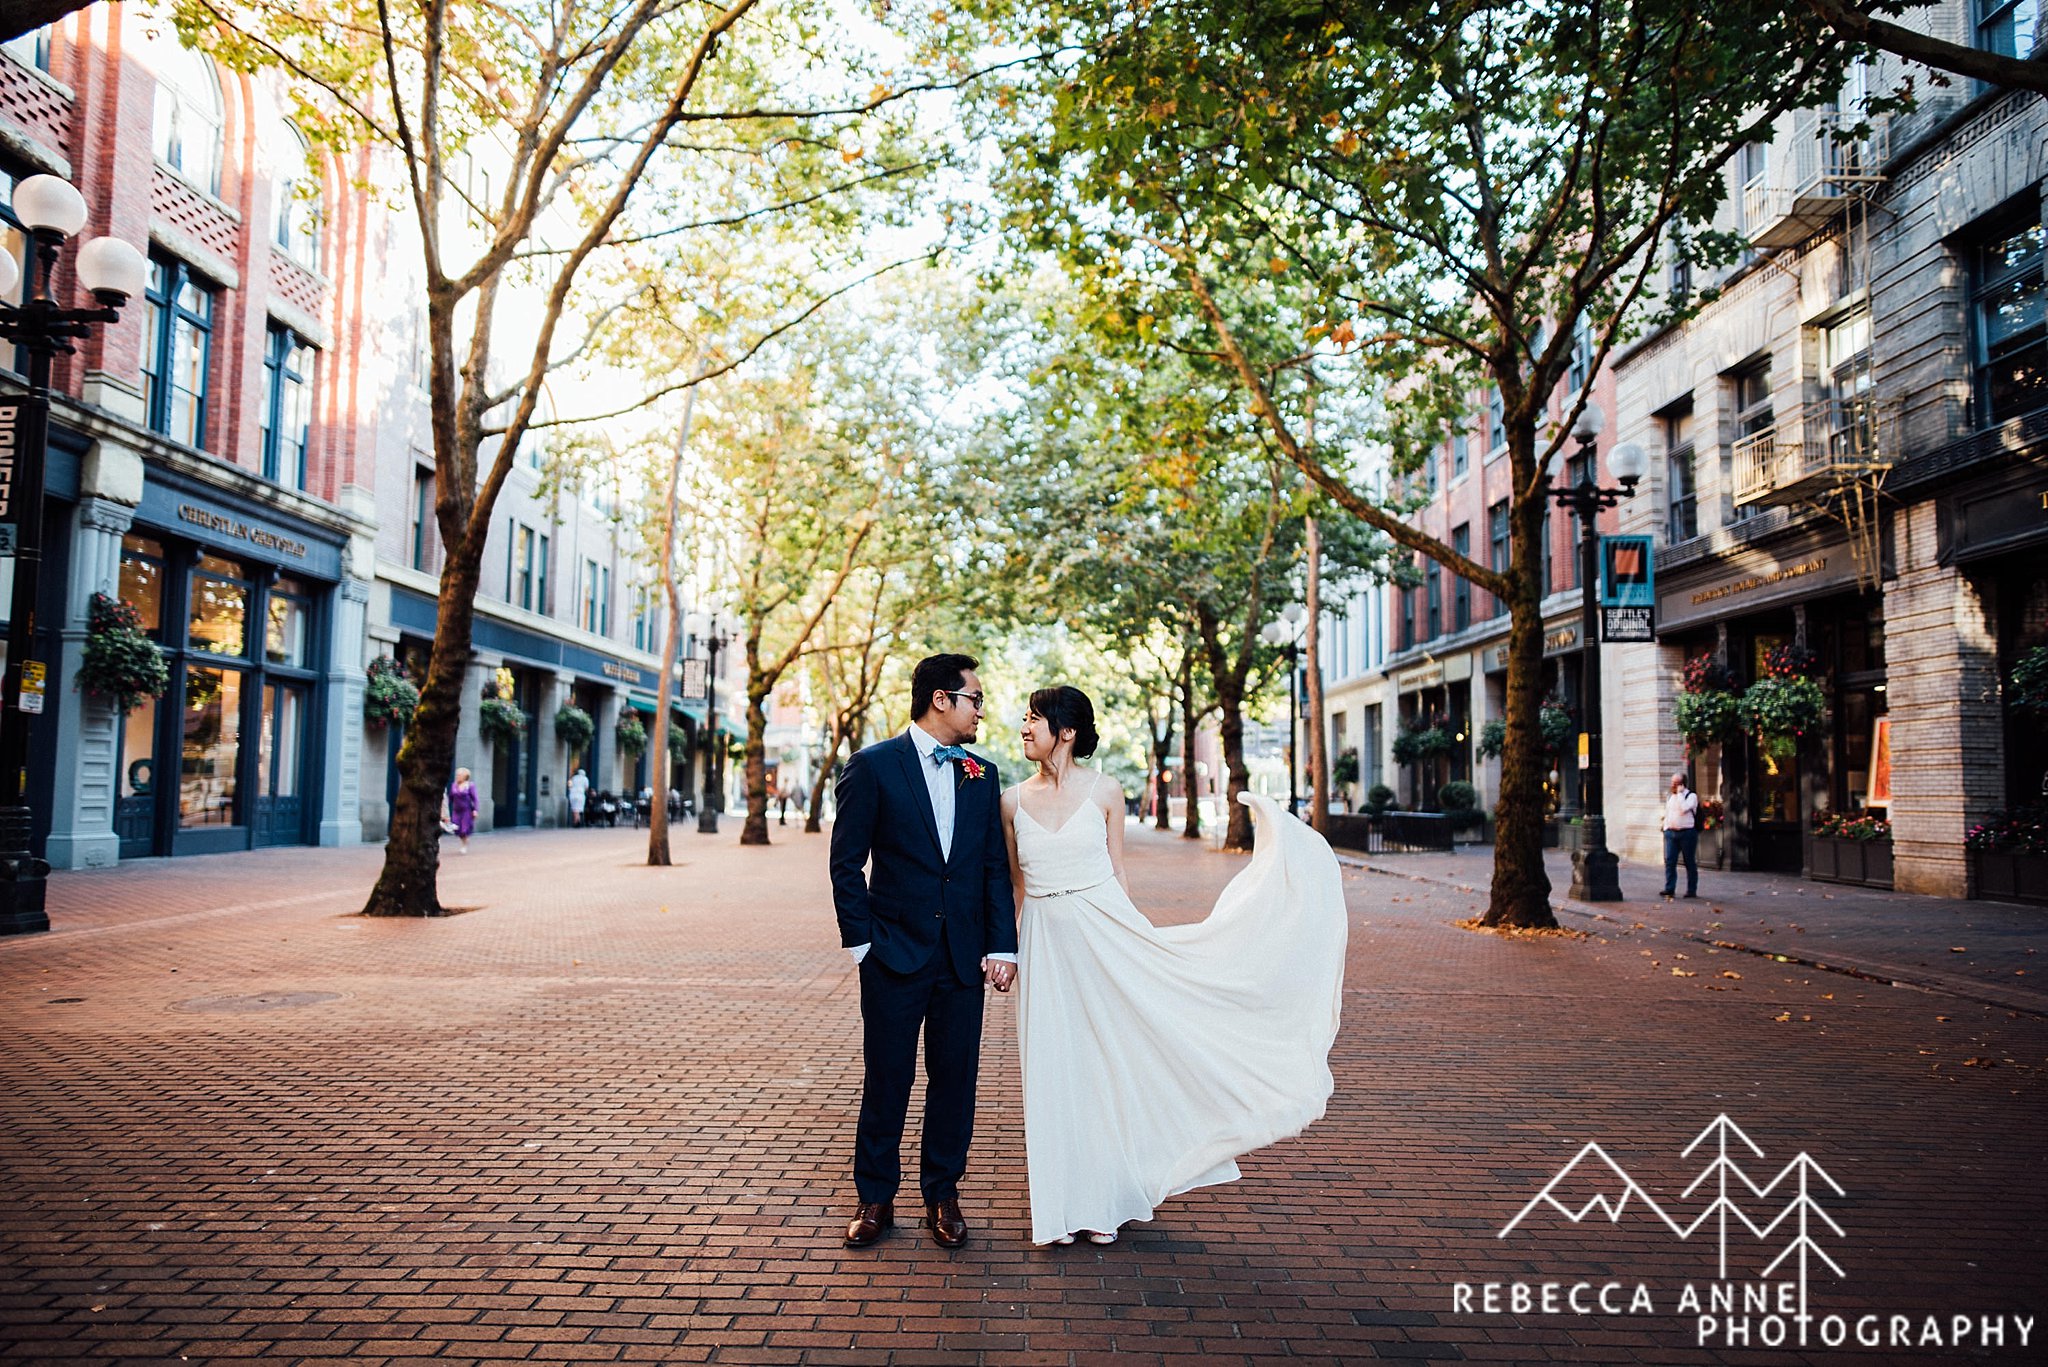 Downtown Seattle Courthouse Elopement,Downtown Seattle Elopement,Courthouse Wedding Photos,Downtown Seattle Wedding Photos,Seattle Wedding Photographer,Seattle Elopement Photographer,Seattle Wedding Photography,Seattle Elopement Photography,